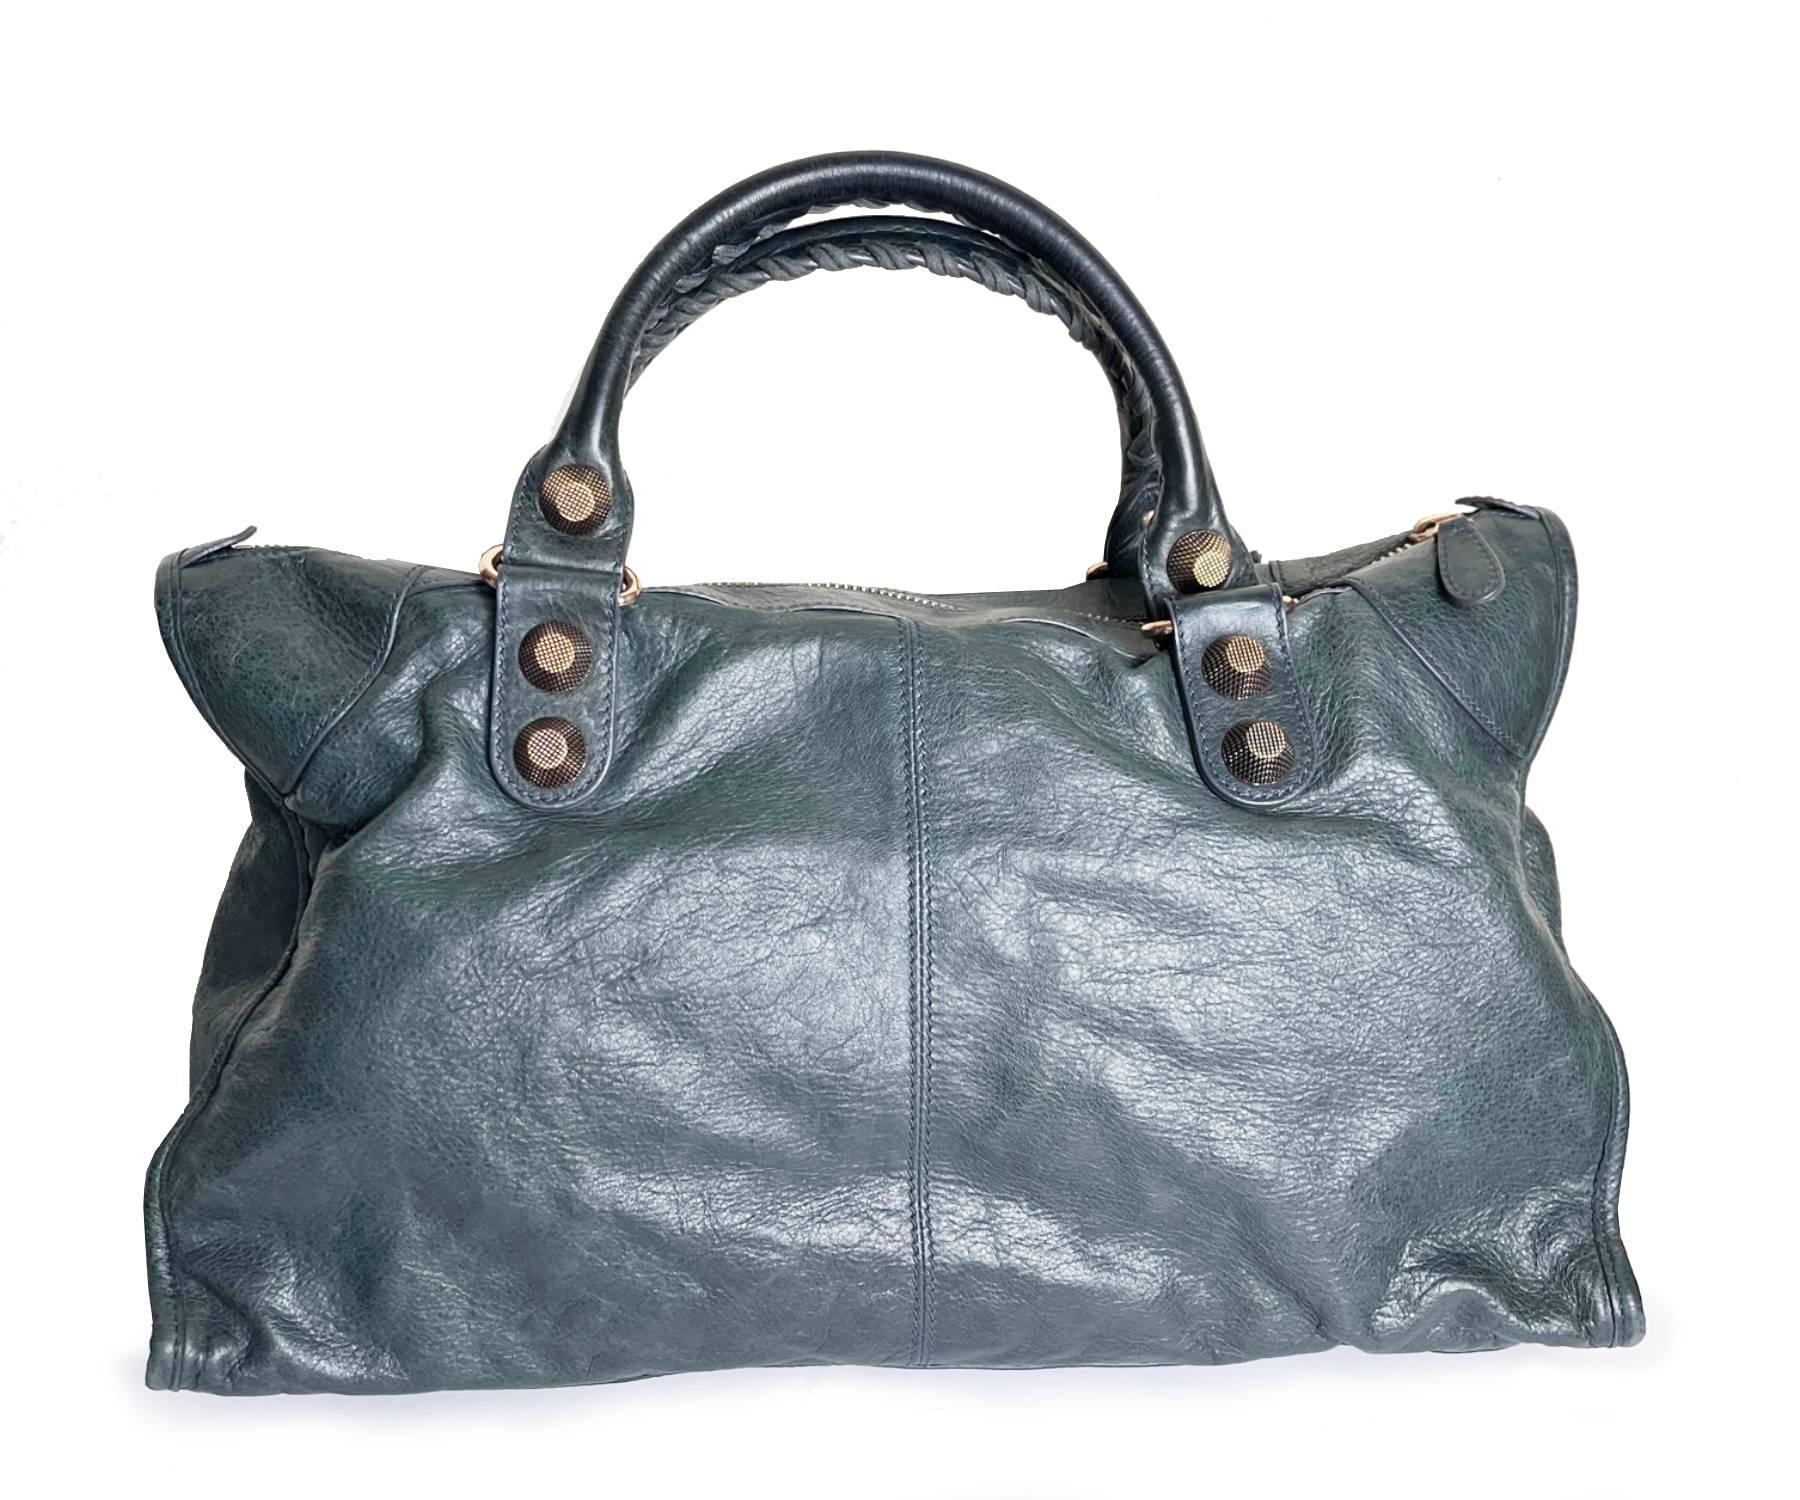 Balenciaga Blue Grey Motorcycle City Hand bag

*Marked Balenciaga
*Made in Italy

-Approximately 17.5″ x 9.5″ x 7.5″
-Very chic with the slate grayish blue color
-In a very good condition

1218-D21119